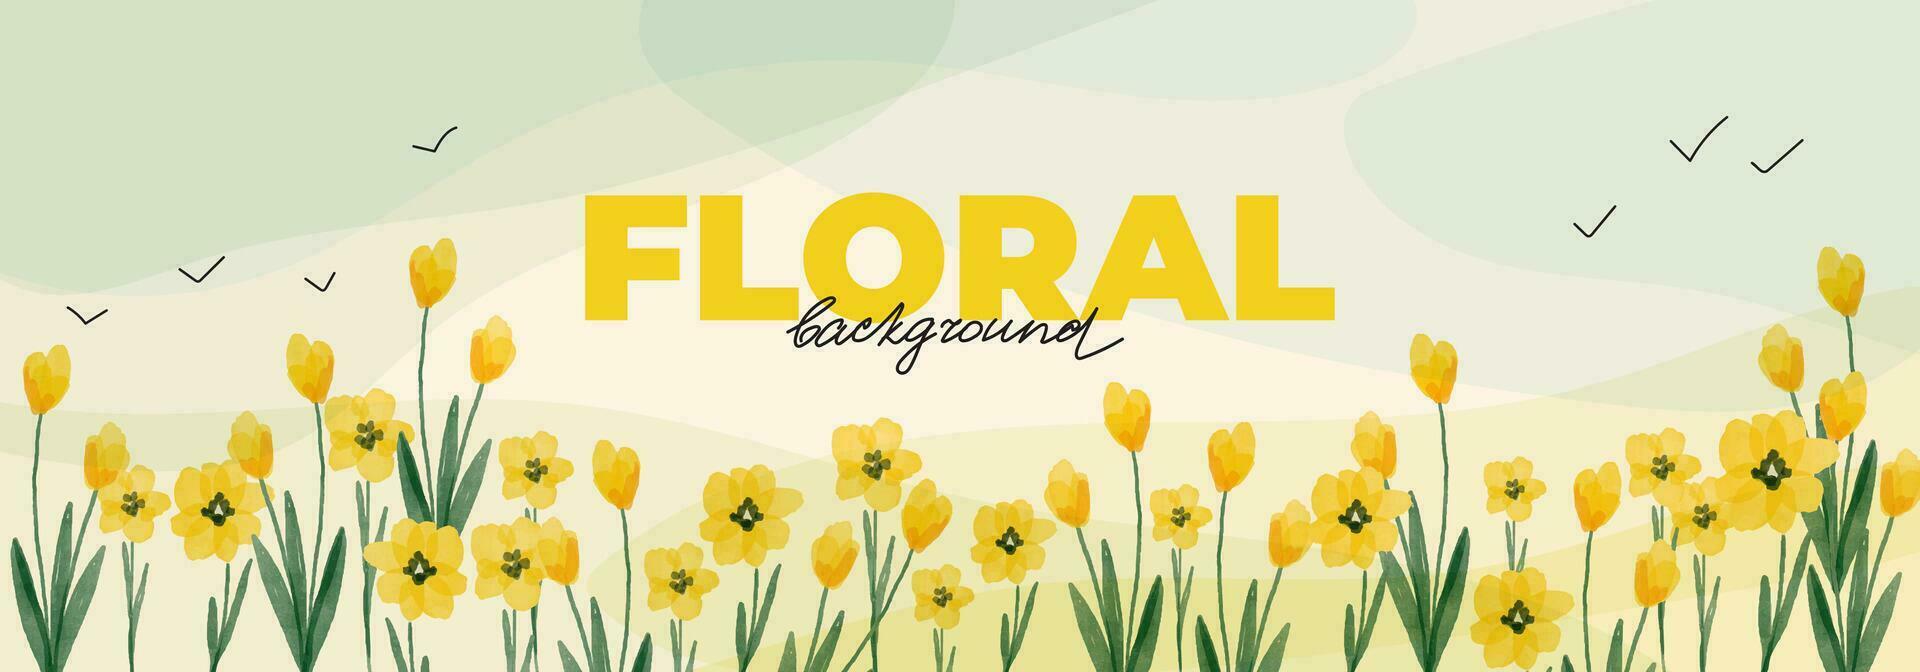 Spring background with watercolor botanical elements for banner design. Template with yellow flowers, tulip field, floral elements, stems. Landscape illustration vector